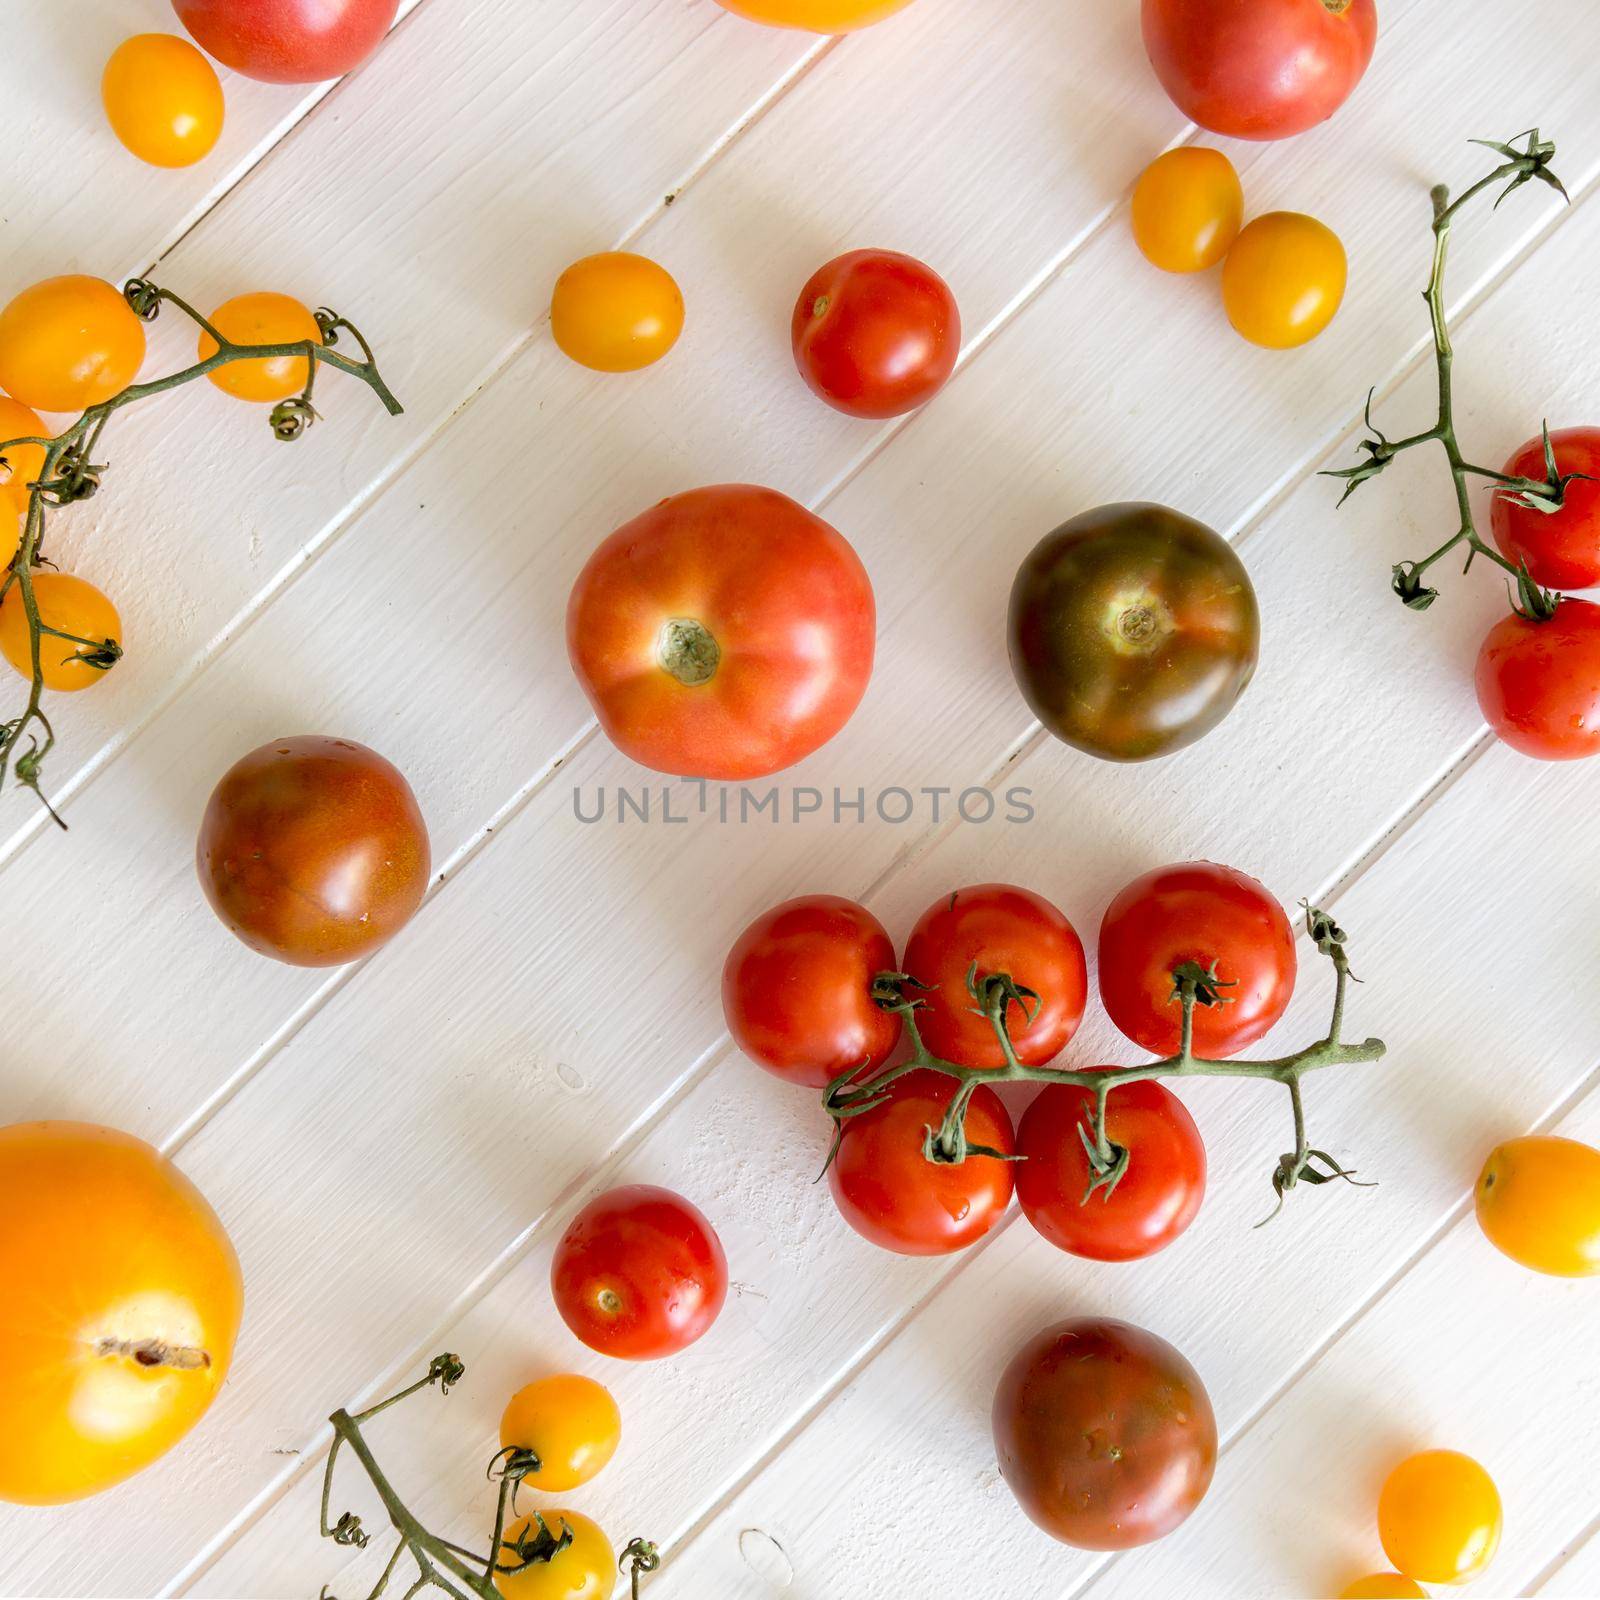 A variety of kinds of tomato by tan4ikk1